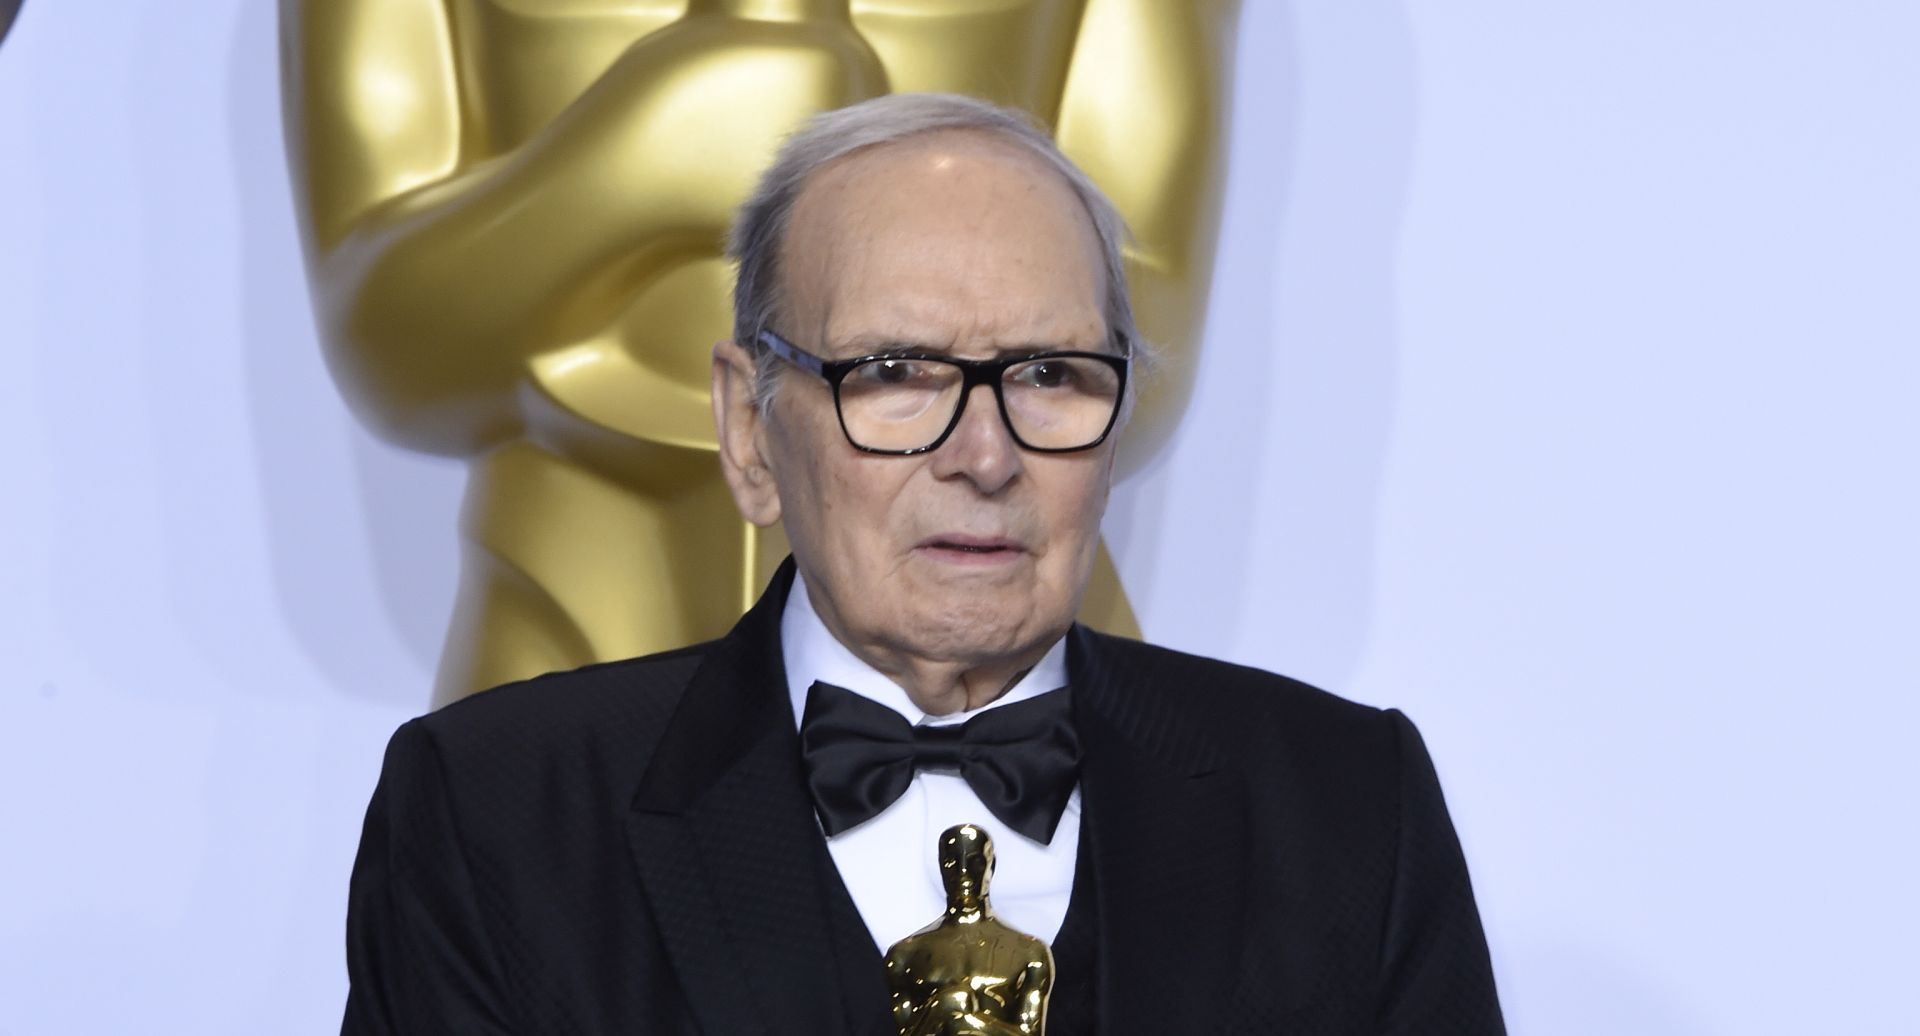 epa08530054 (FILE) - Italian composer Ennio Morricone holds the Oscar for Best Original Score for 'The Hateful Eight' in the press room during the 88th annual Academy Awards ceremony in Hollywood, California, USA, 28 February 2016 (reissued 06 July 2020). Italian composer Ennio Morricone died on 06 July 2020 at the age of 91.  EPA/PAUL BUCK